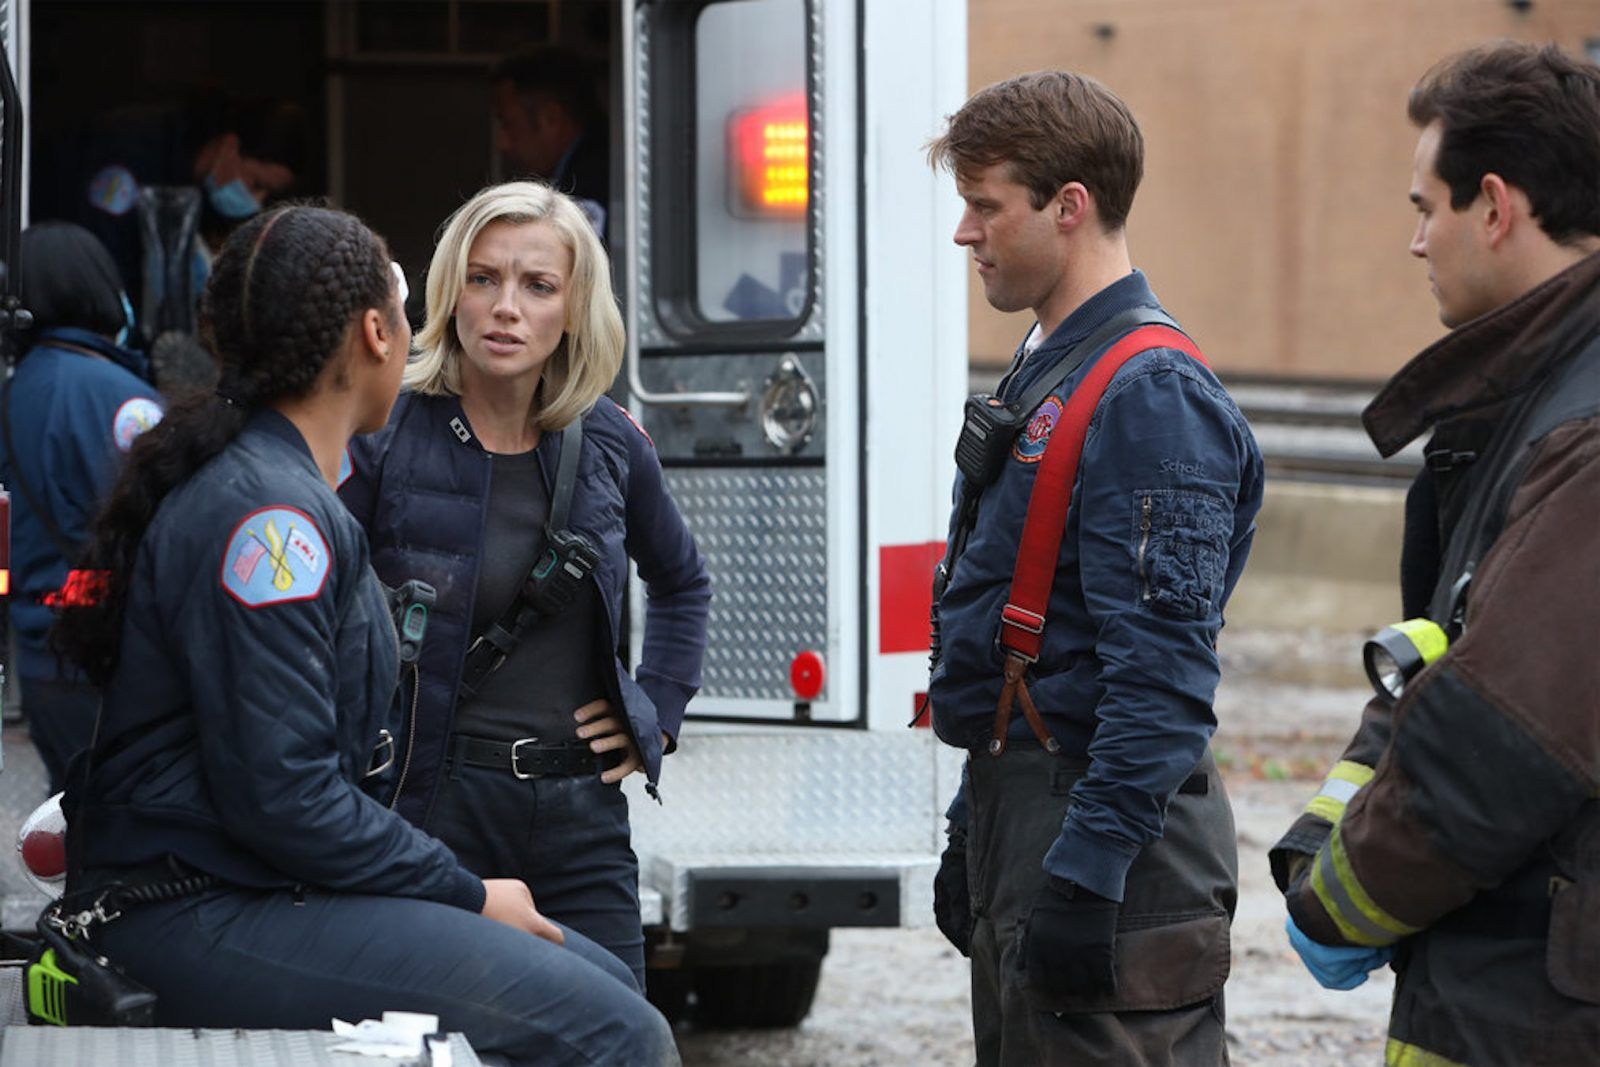 Chicago Fire Season 9 Episode 5 Release Date, Preview and Recap